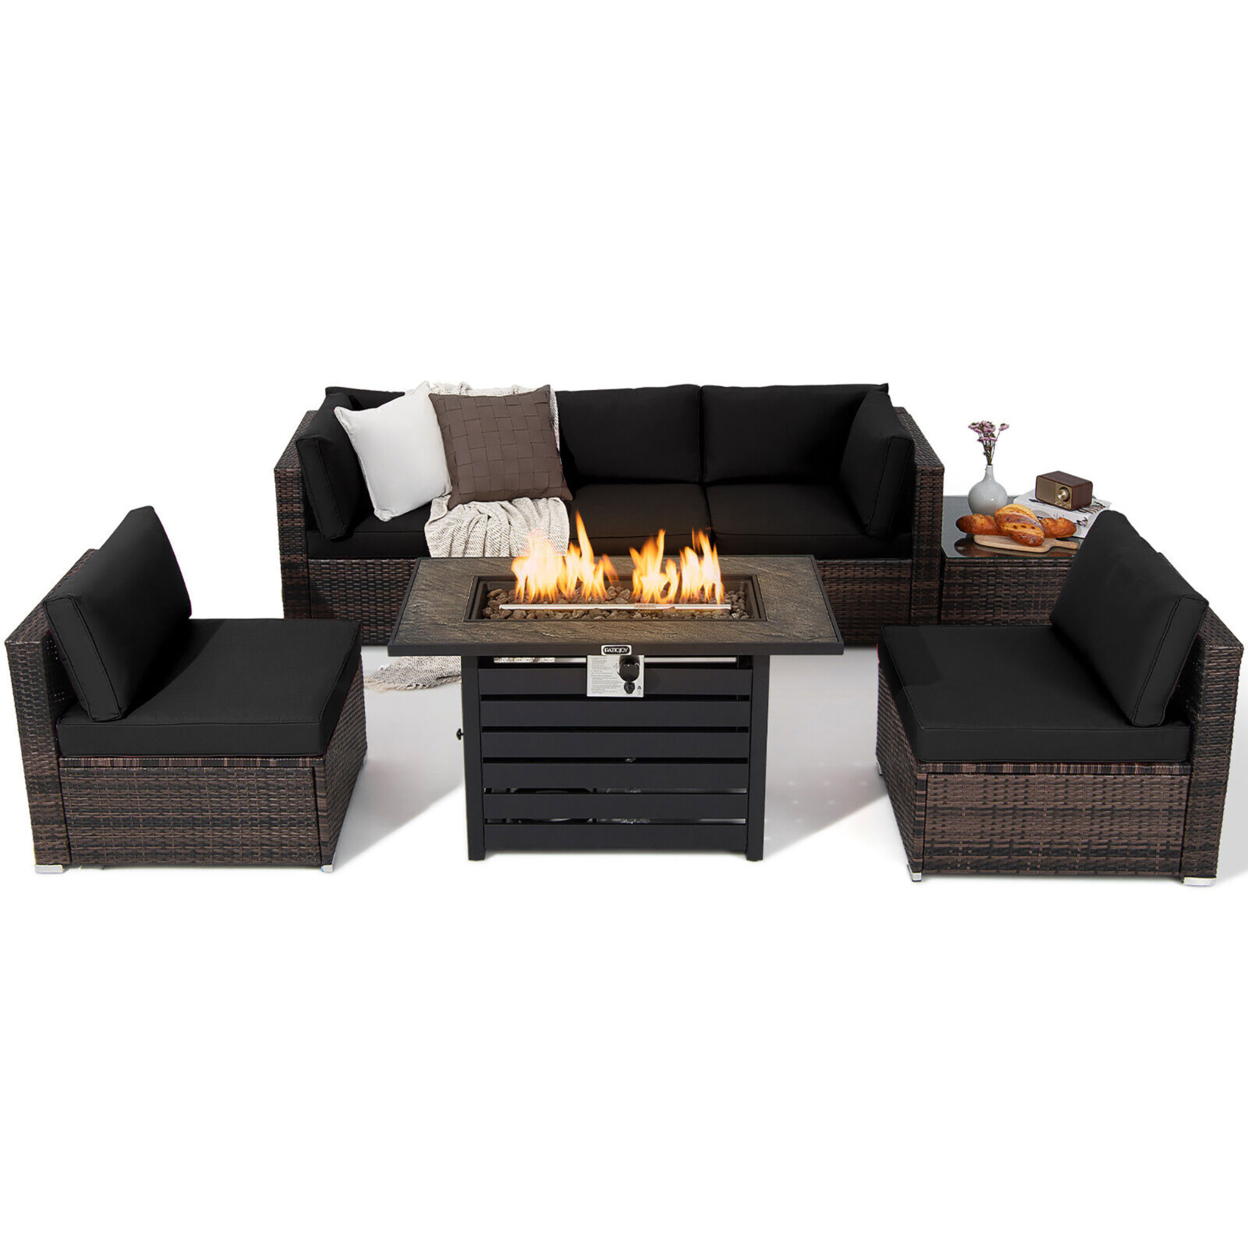 7PCS Patio Rattan Furniture Set 42'' Fire Pit Table W/ Cover Cushioned - Black